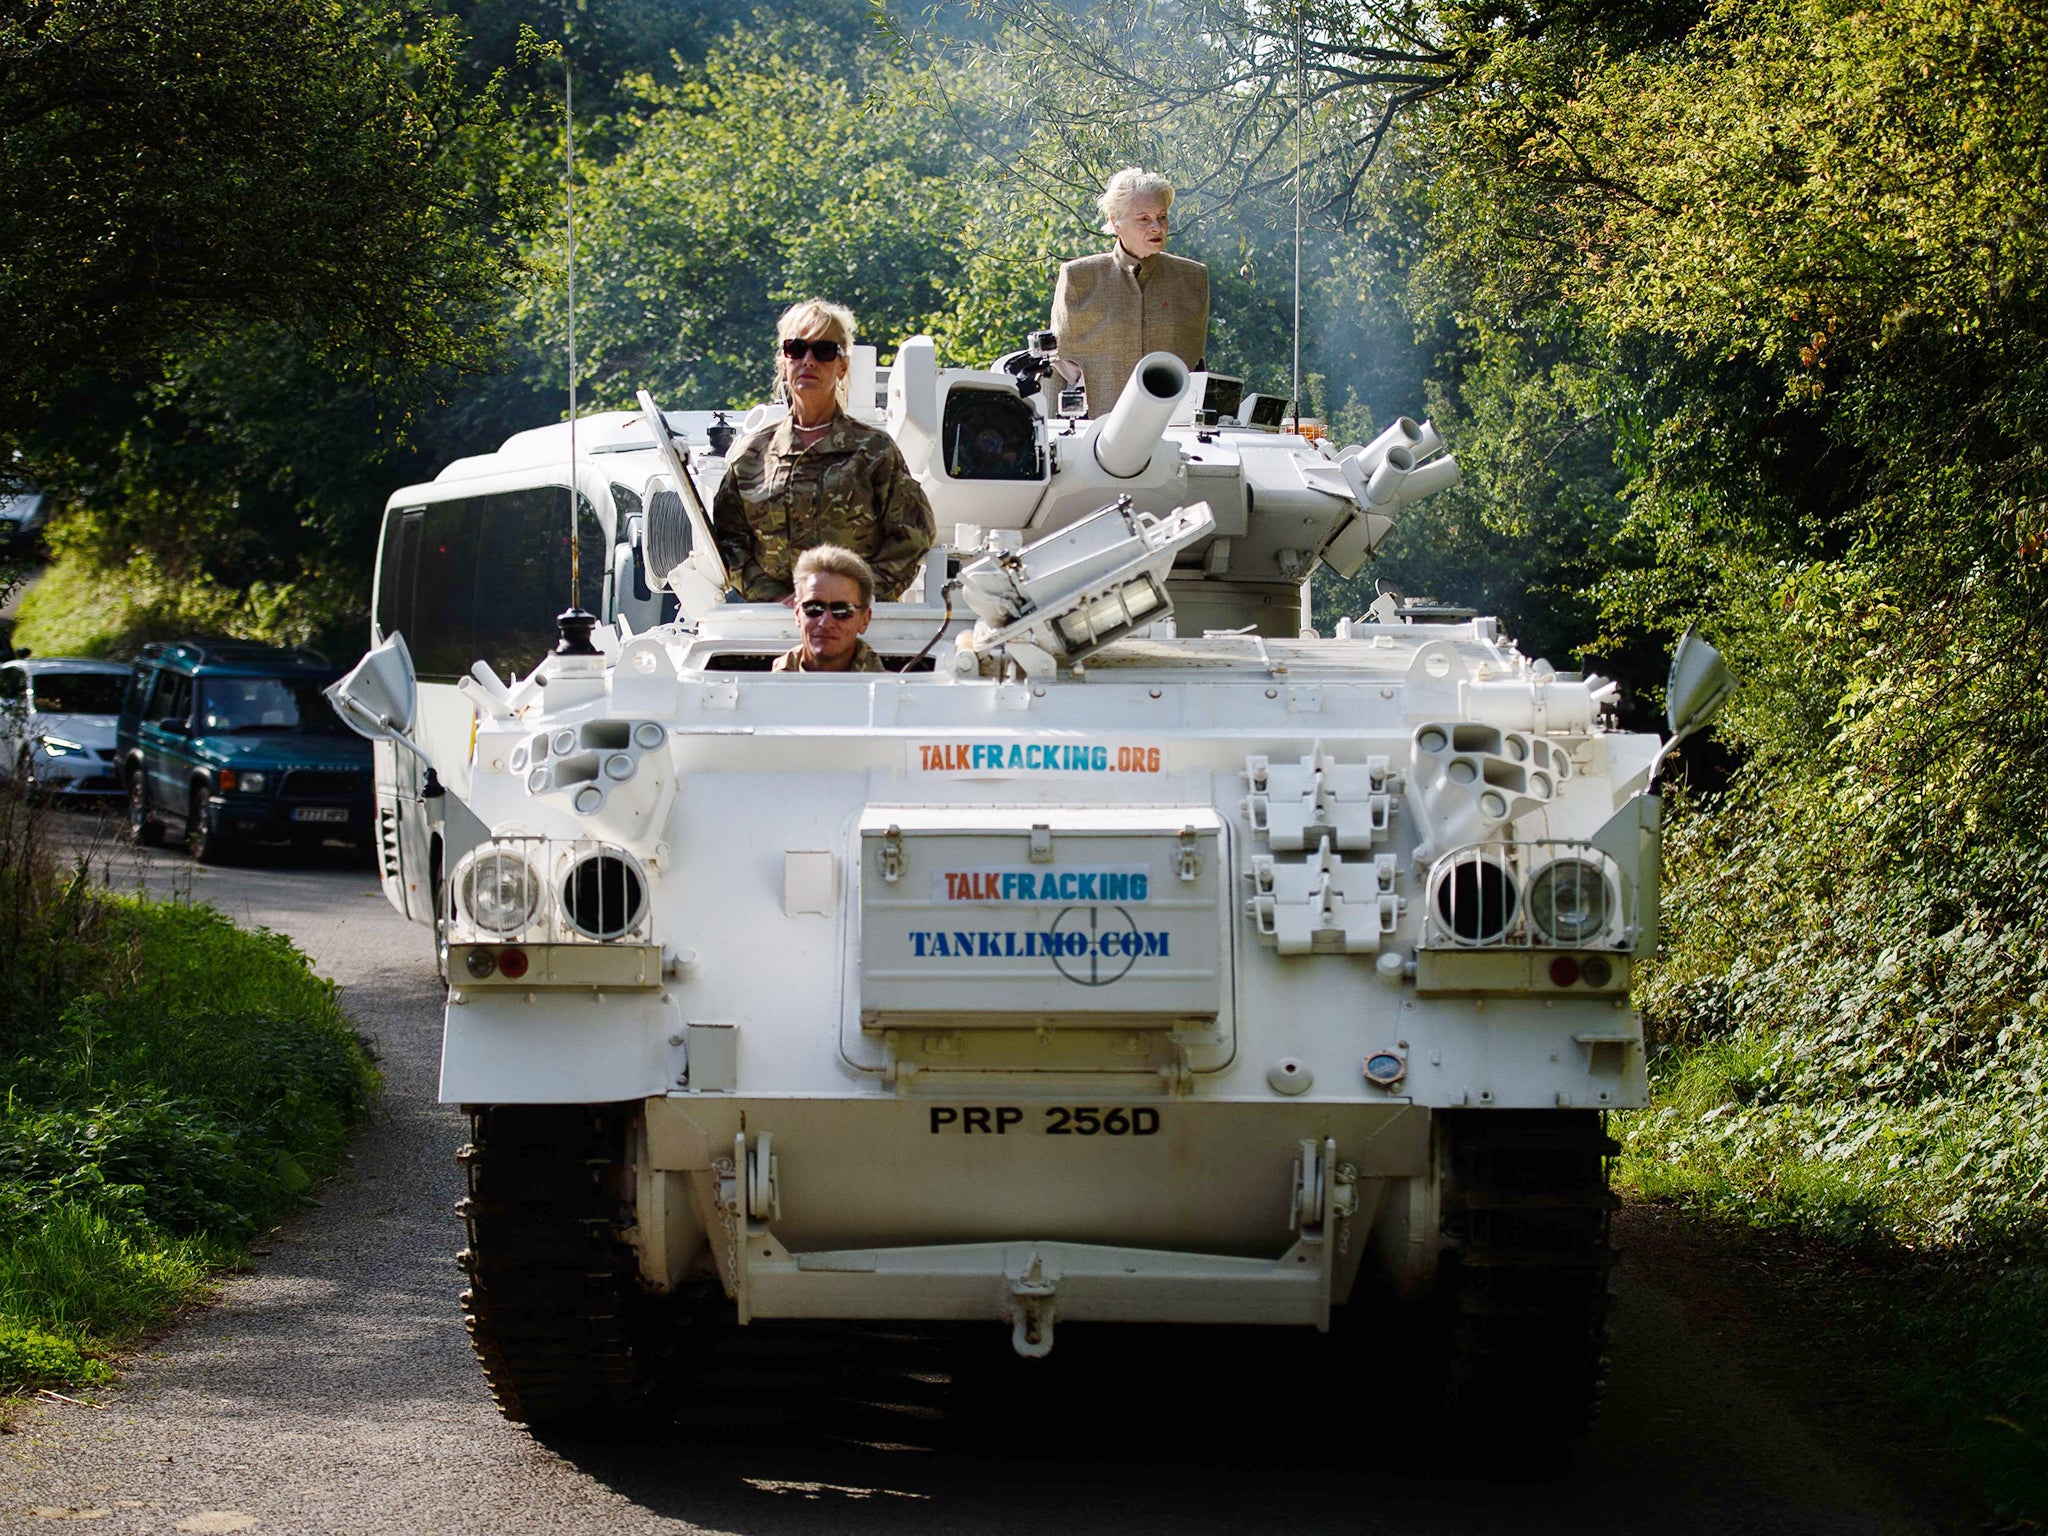 Fashion designer and environmental campaigner Vivienne Westwood (R) rides on top of an armored personnel carrier (APC) towards the home of British Prime Minister David Cameron's home in Chadlington, Oxfordshire, to highlight the Government's plan to use h